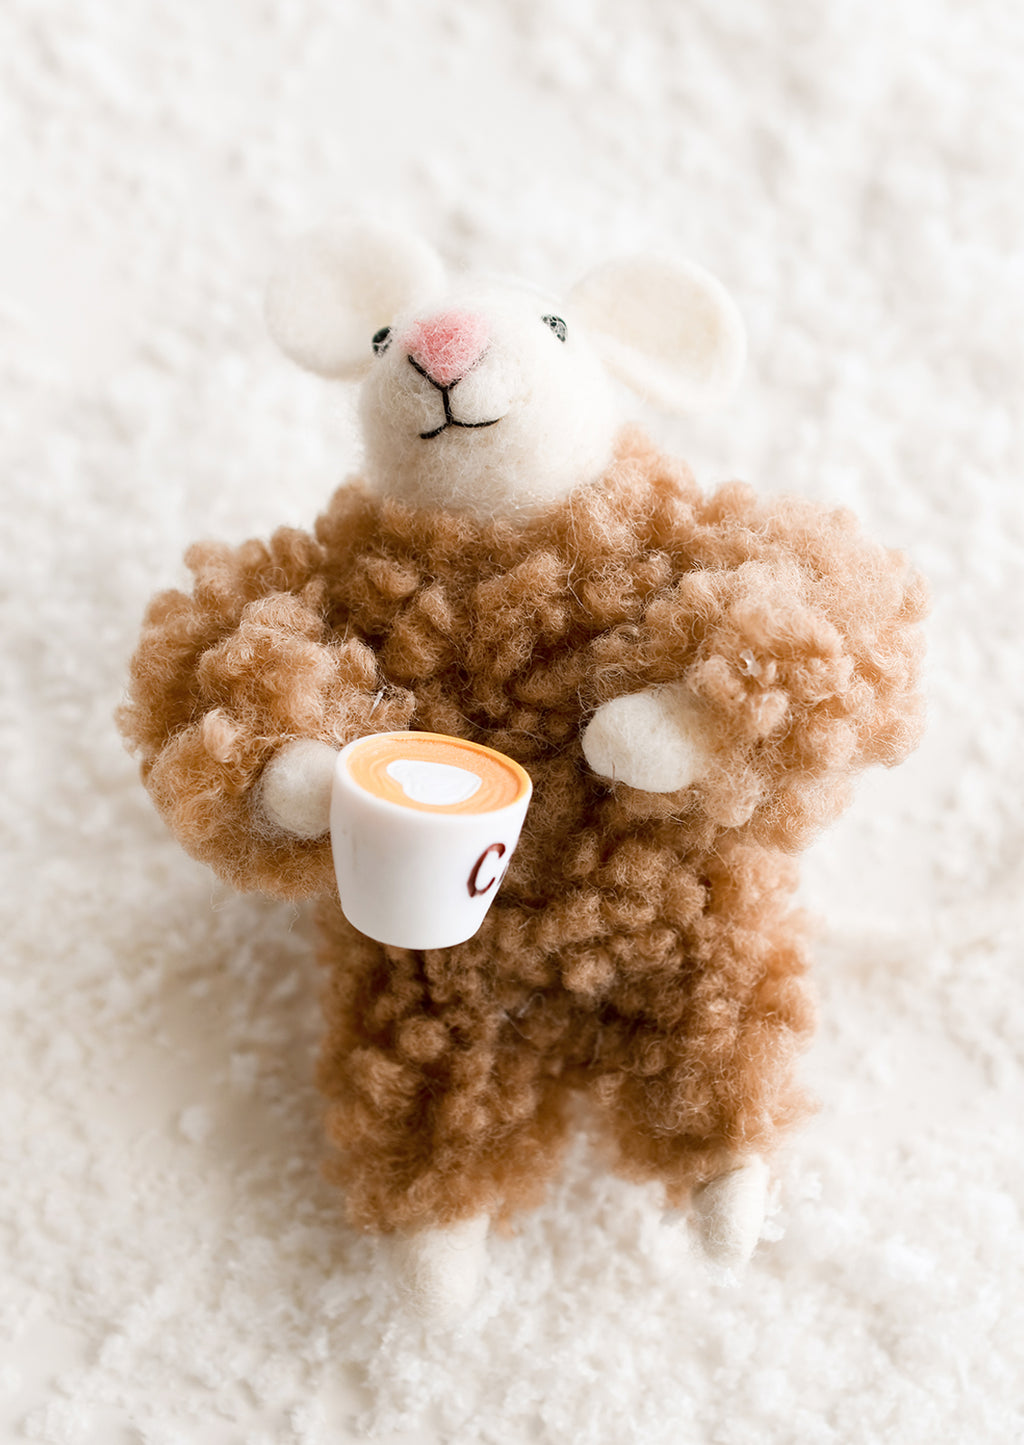 Coffee: A felted mouse ornament in brown fuzzy pajamas, holding cup of coffee.